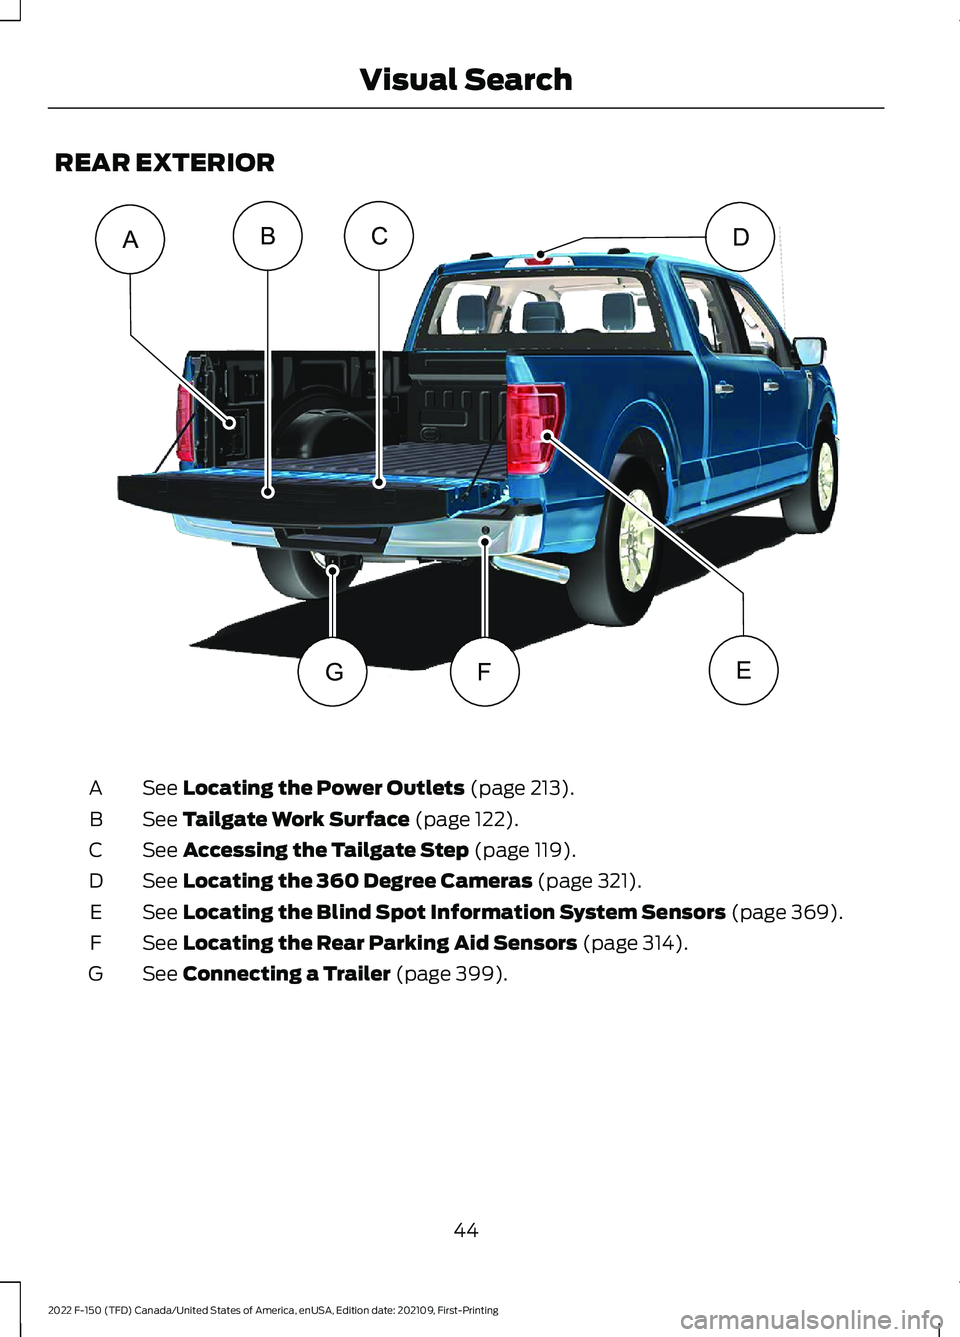 FORD F-150 2022  Owners Manual REAR EXTERIOR
See Locating the Power Outlets (page 213).
A
See 
Tailgate Work Surface (page 122).
B
See 
Accessing the Tailgate Step (page 119).
C
See 
Locating the 360 Degree Cameras (page 321).
D
Se